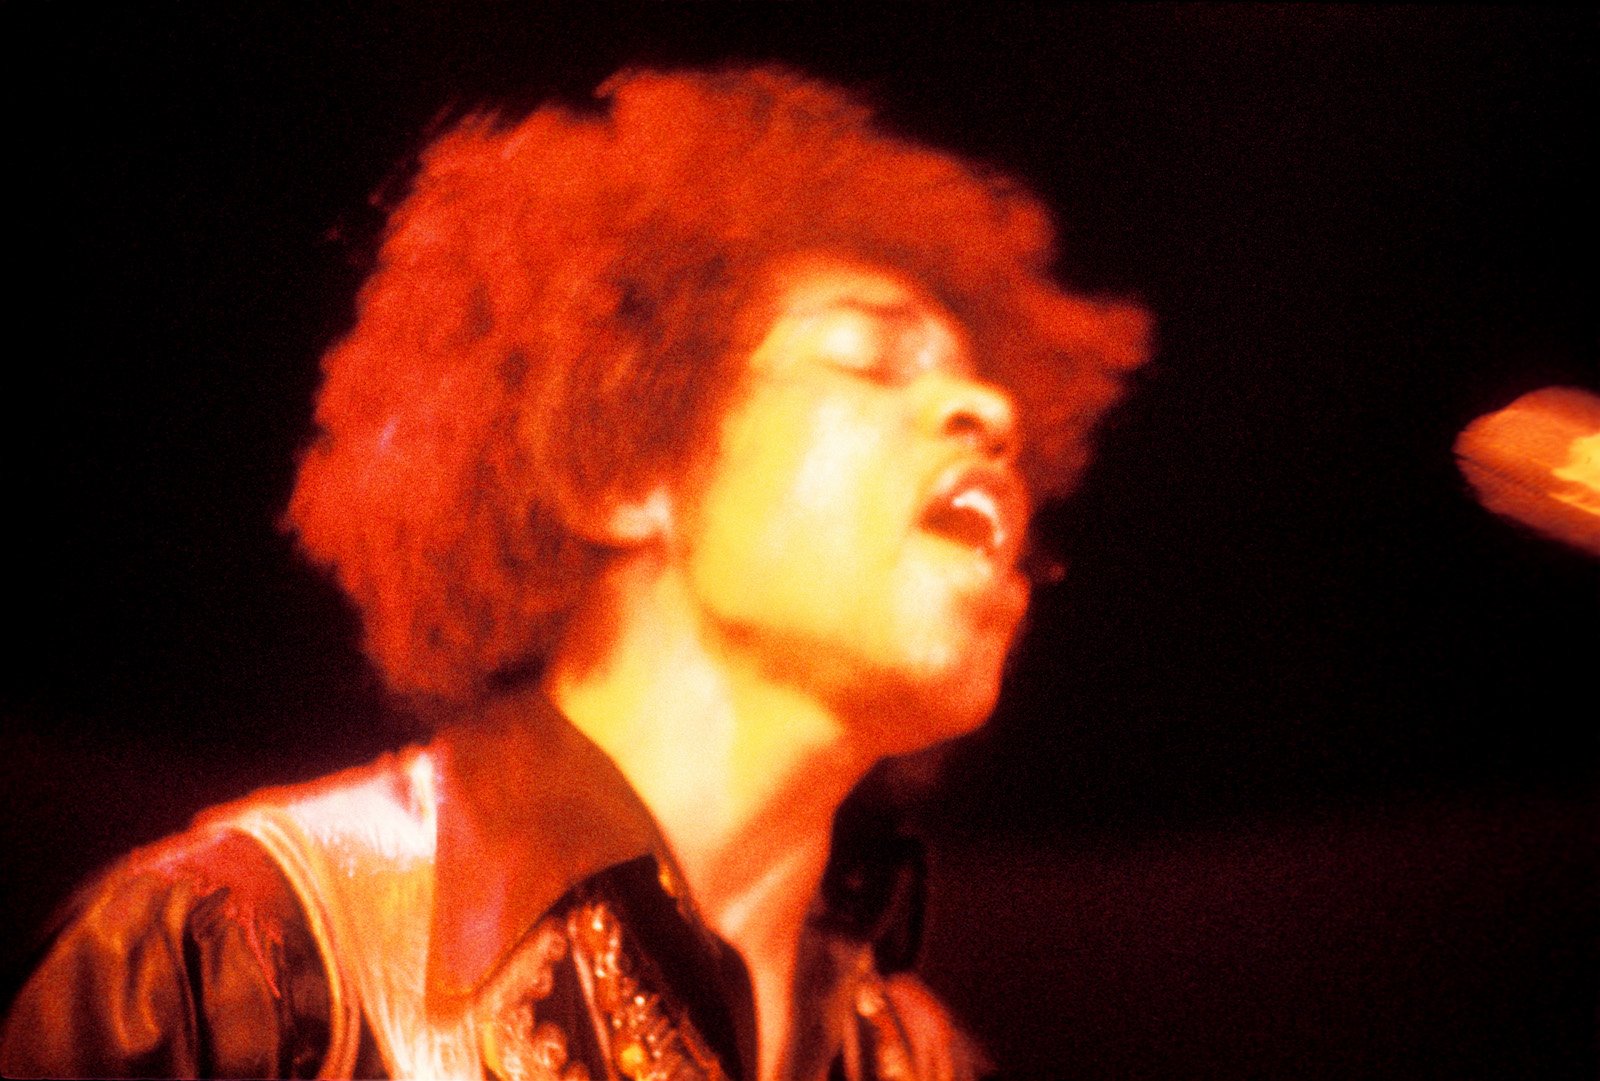 Jimi Hendrix, who lived in an apartment in London, performing on stage